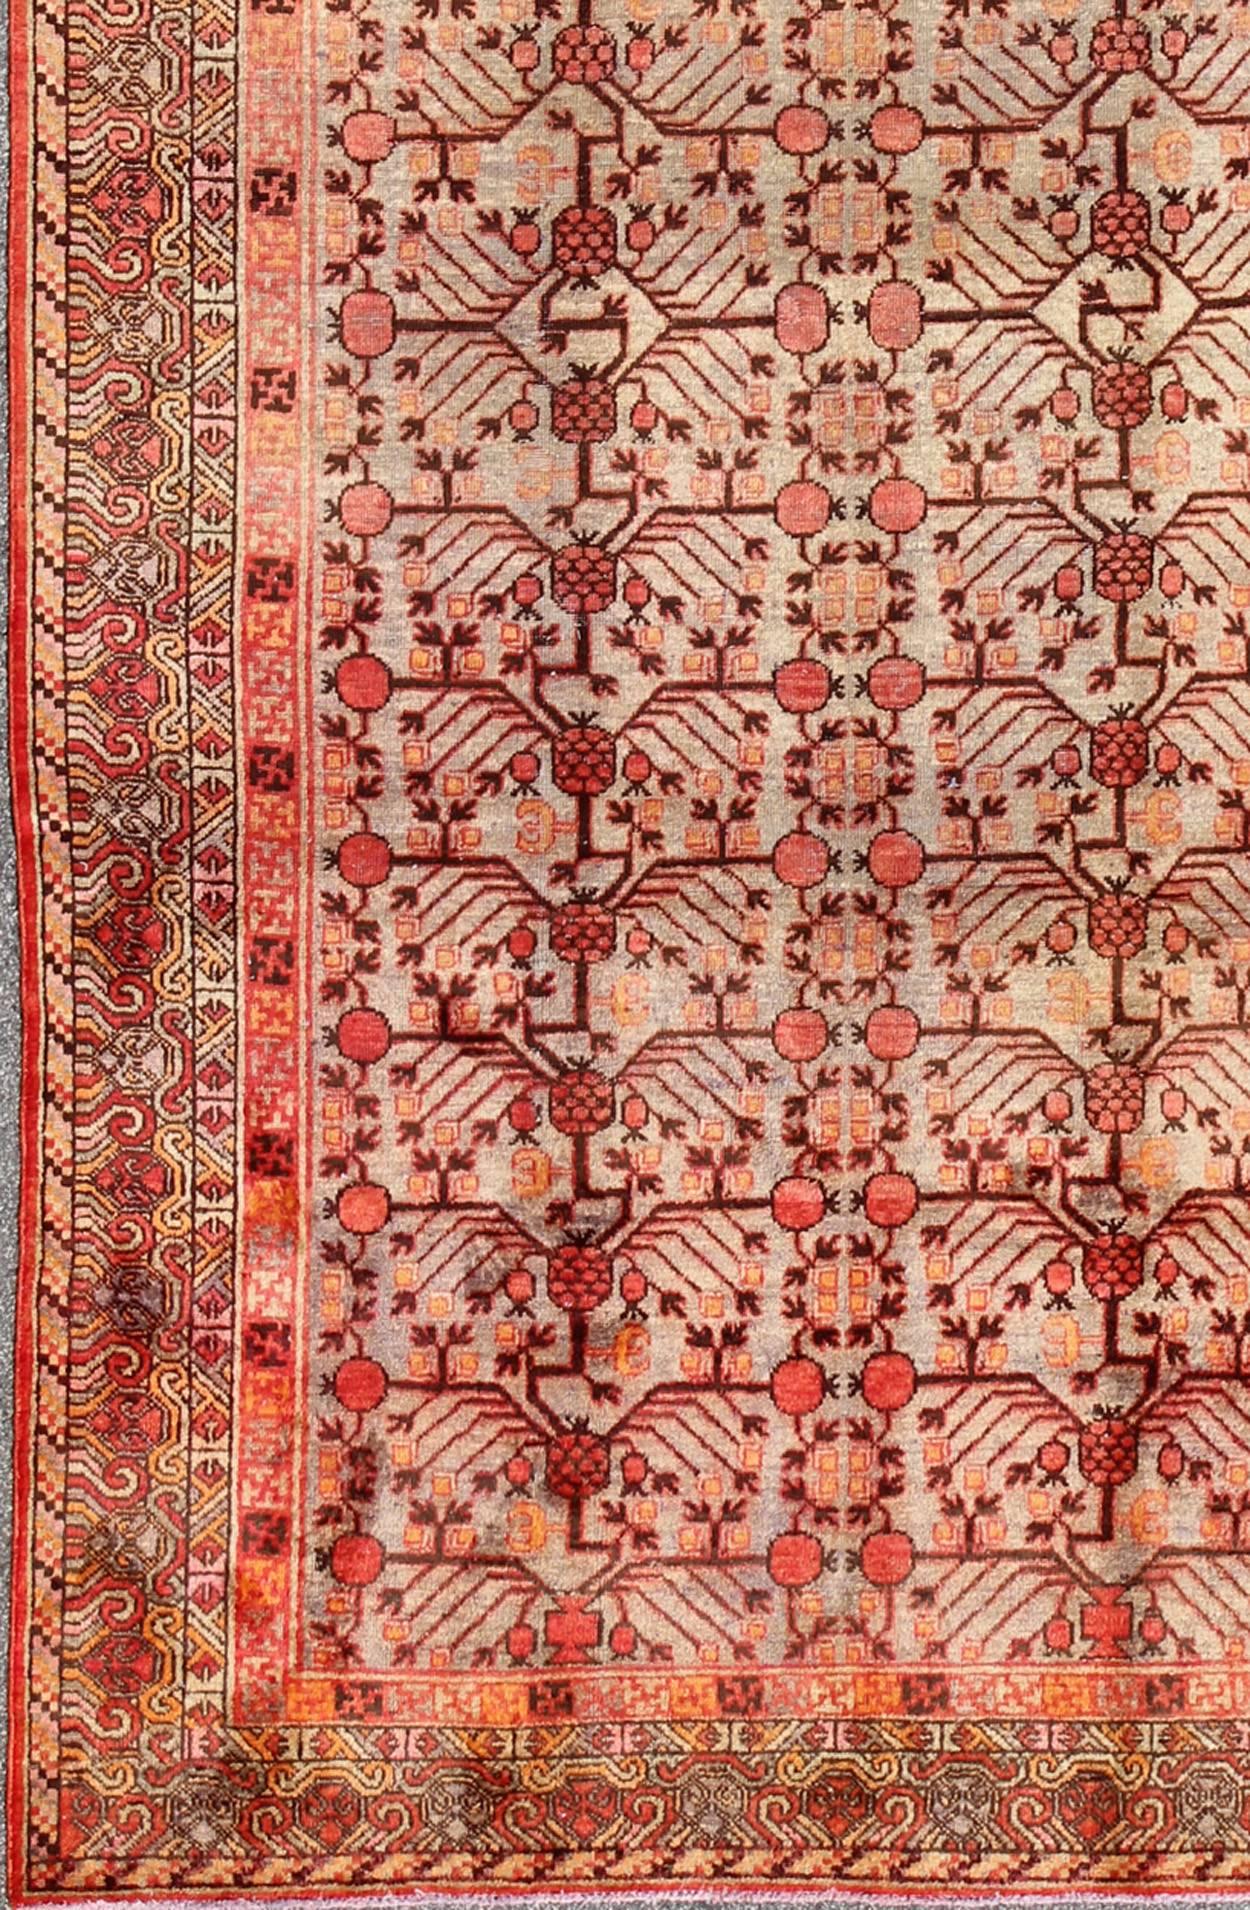 Large Antique Khotan Antique Rug with Pomegranate Design in Taupe, Green, Red and Brown.
This attractive antique Khotan rug is a spectacular testament to the complexity of Turkestan design. The neutral tone of the central field plays host to a